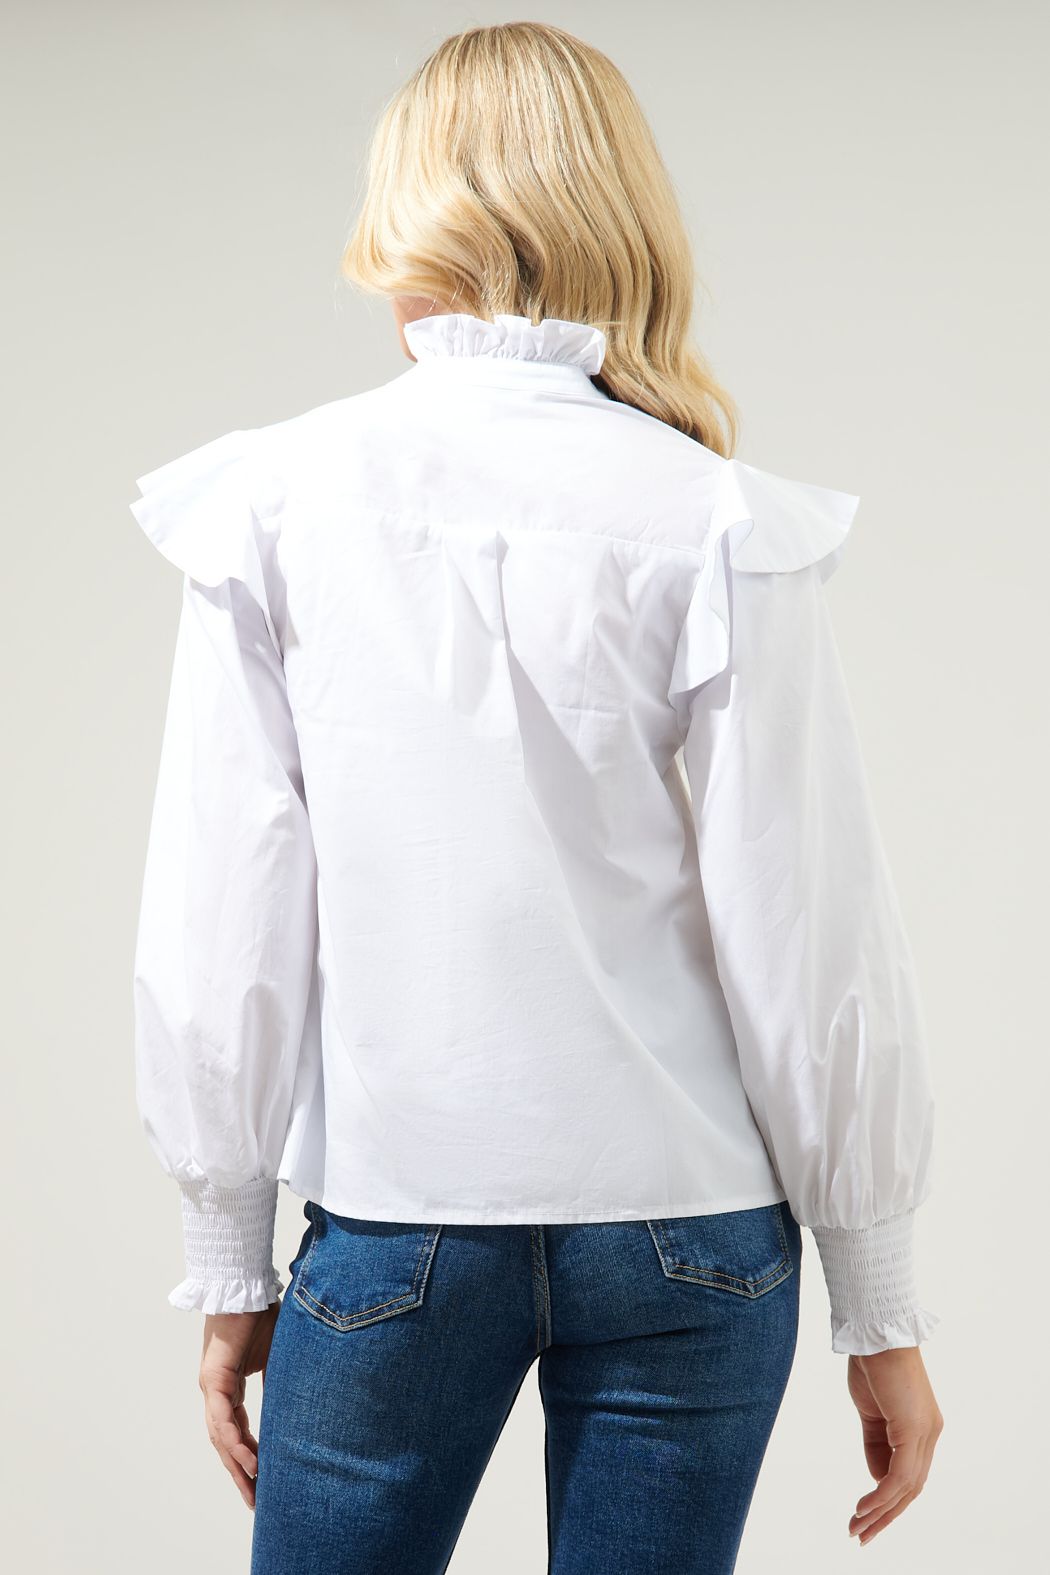 Add this classic poplin blouse to your wardrobe. An easy-to-style top that features a ruffle mock neckline with a button front. Ruffle cap shoulder details top a balloon sleeve with a smocked cuff. Wear this crisp, cool top tucked into high rise denim for an effortless look.